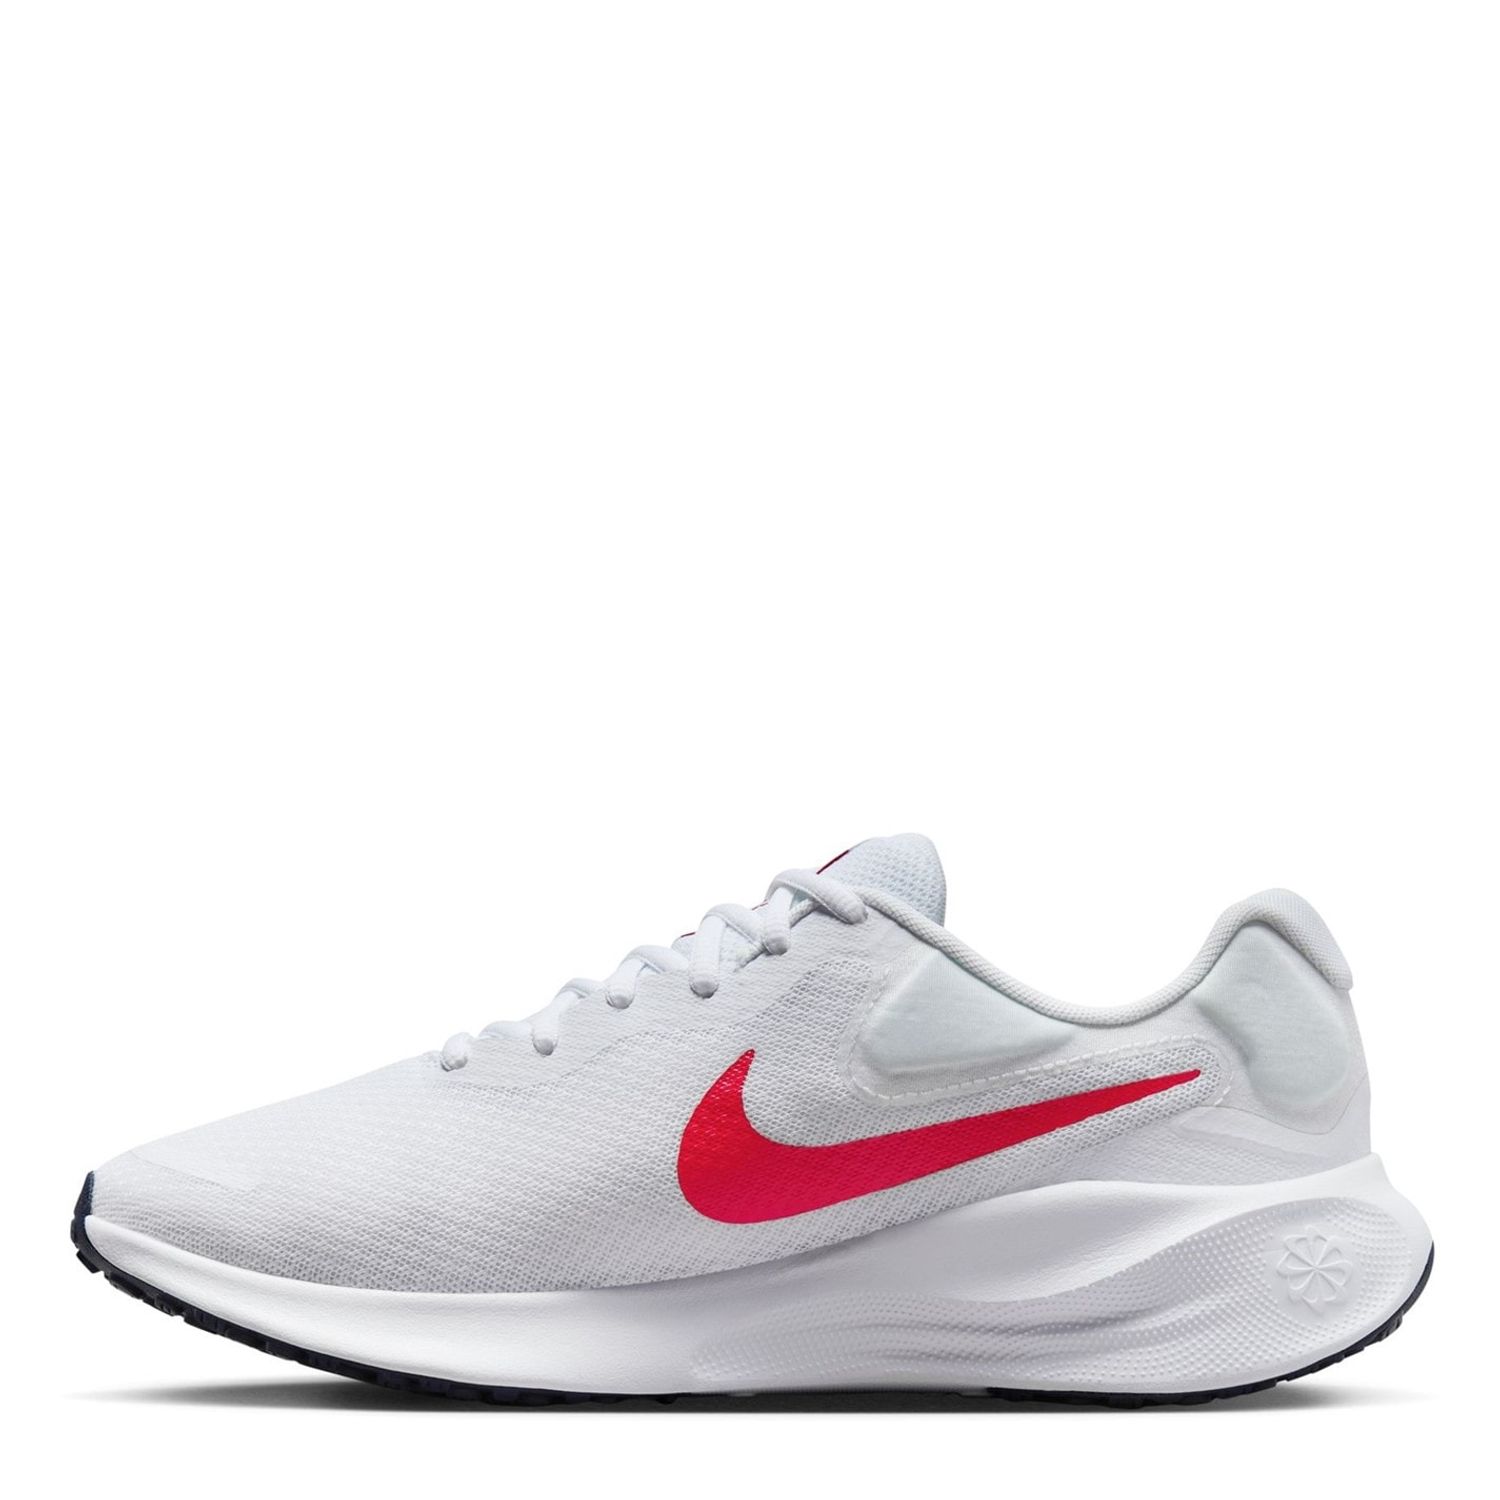 White Nike Mens Revolution 7 Road Running Shoes - Get The Label